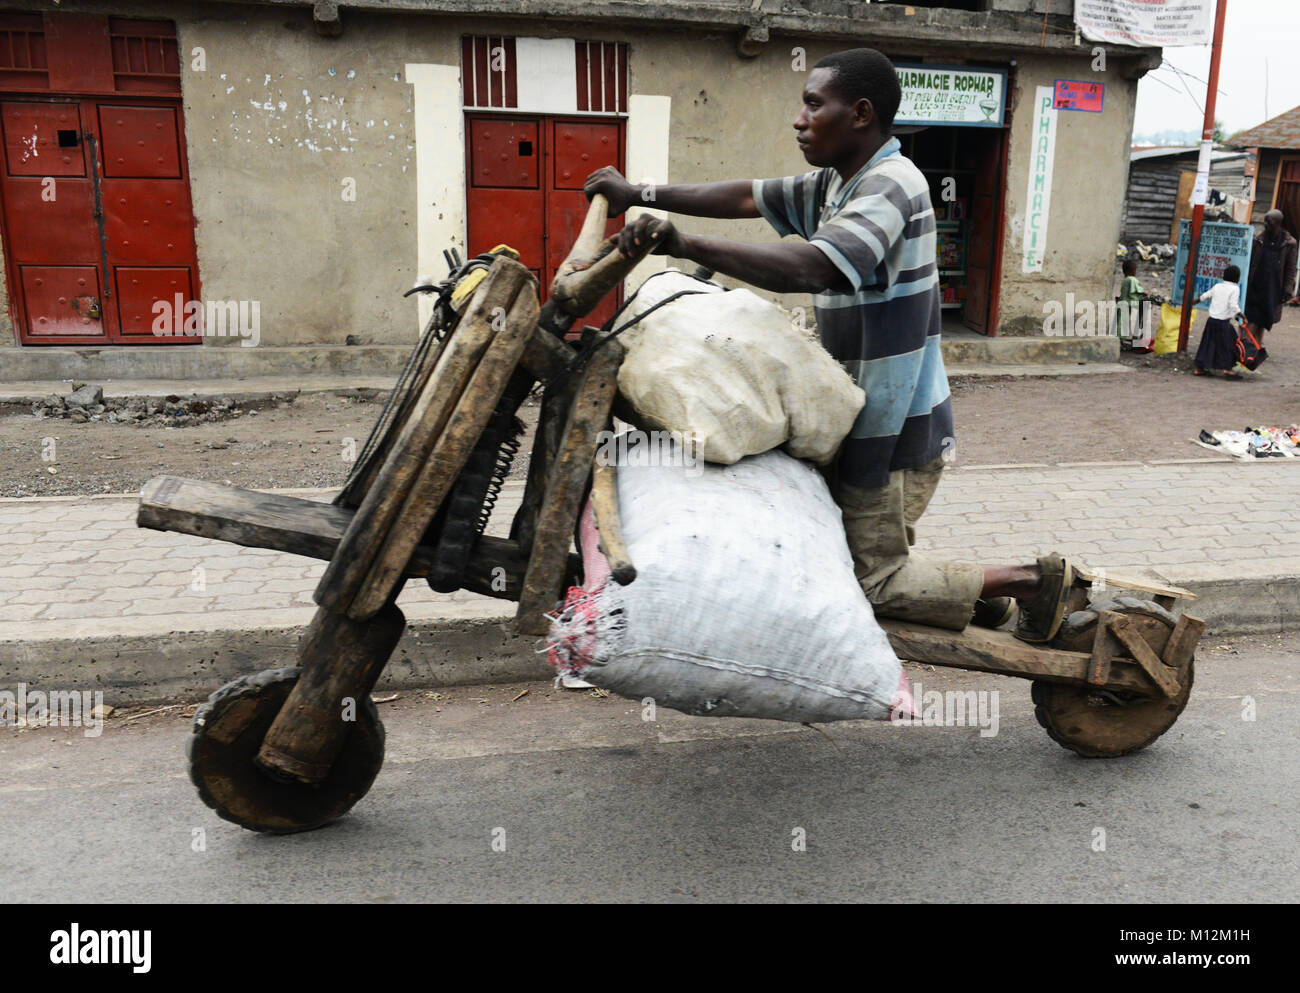 Chukudu is a traditional wooden bike transporting goods in Goma and Eastern Congo. Stock Photo